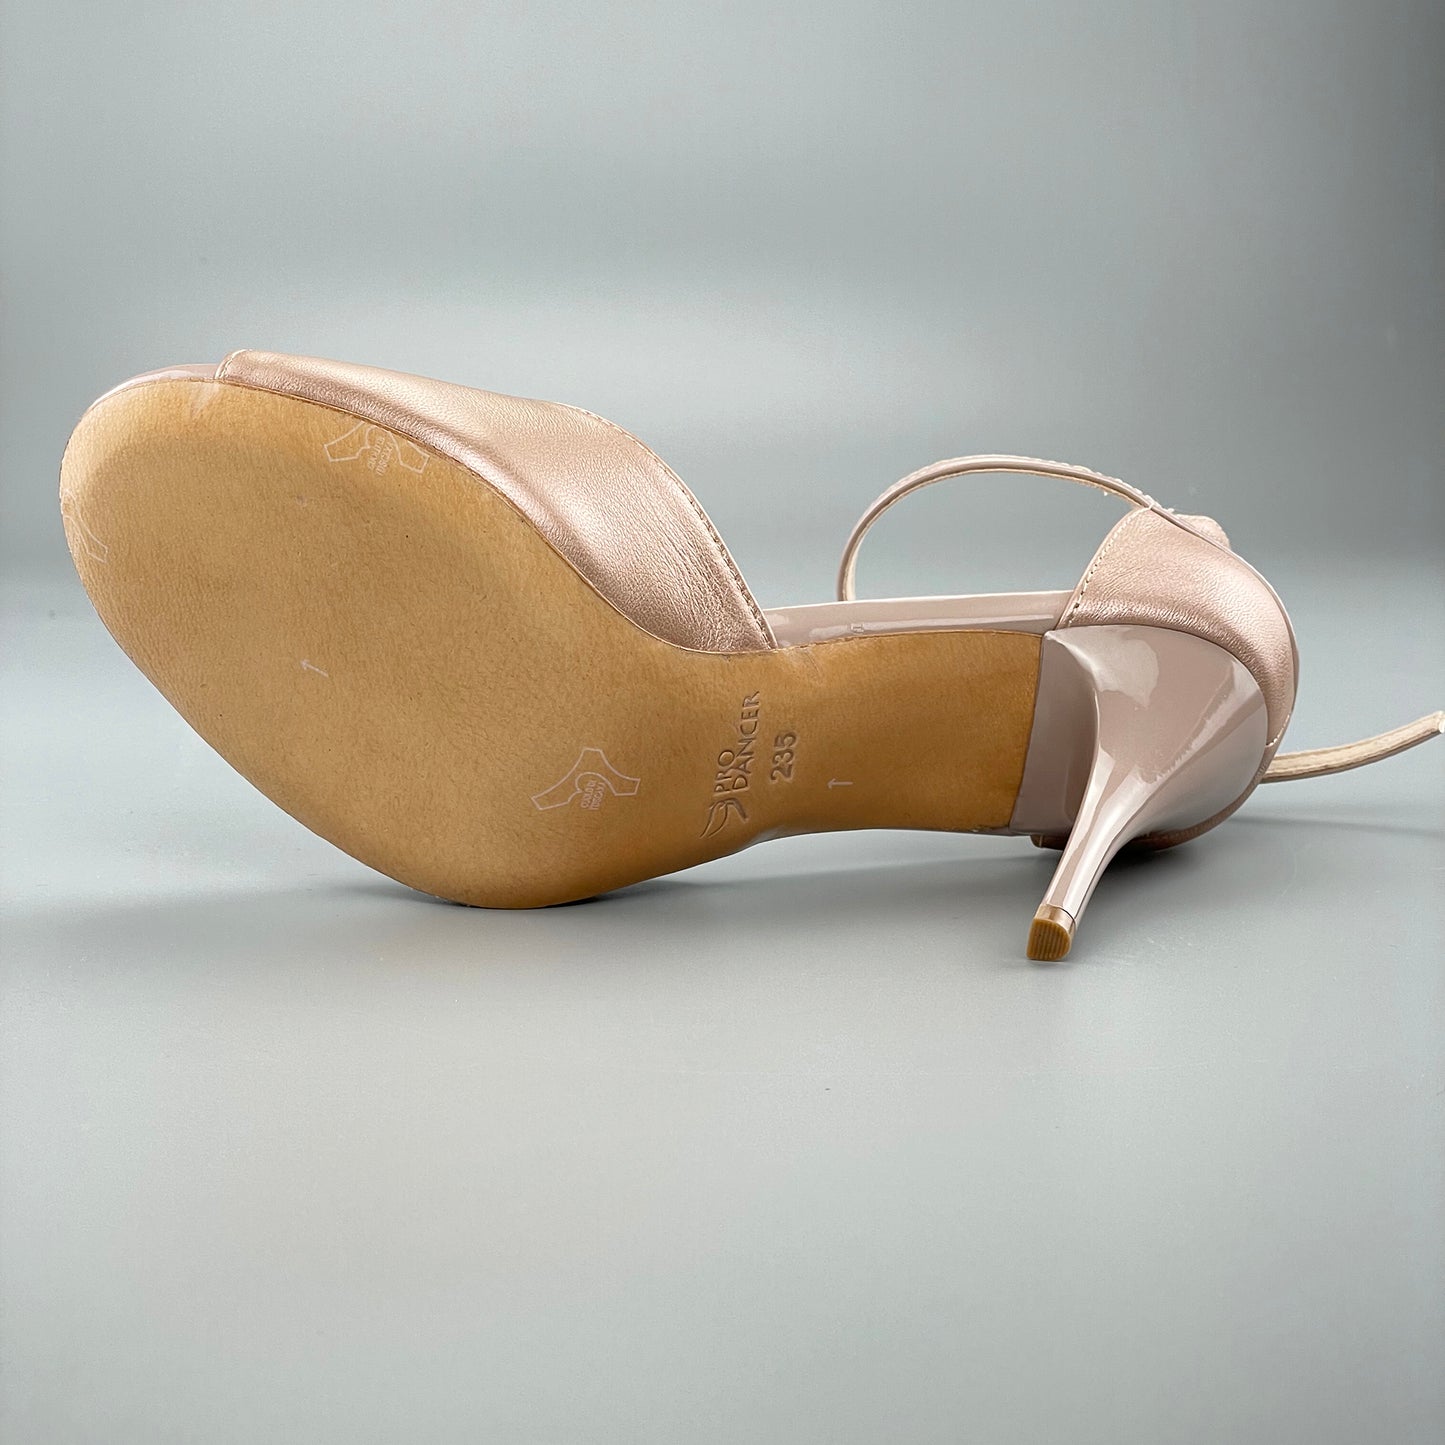 Pro Dancer Open-toe and Closed-back Argentine Tango Shoes High Salsa Heels Hard Leather Sole Sandals Nude (PD-9043D)